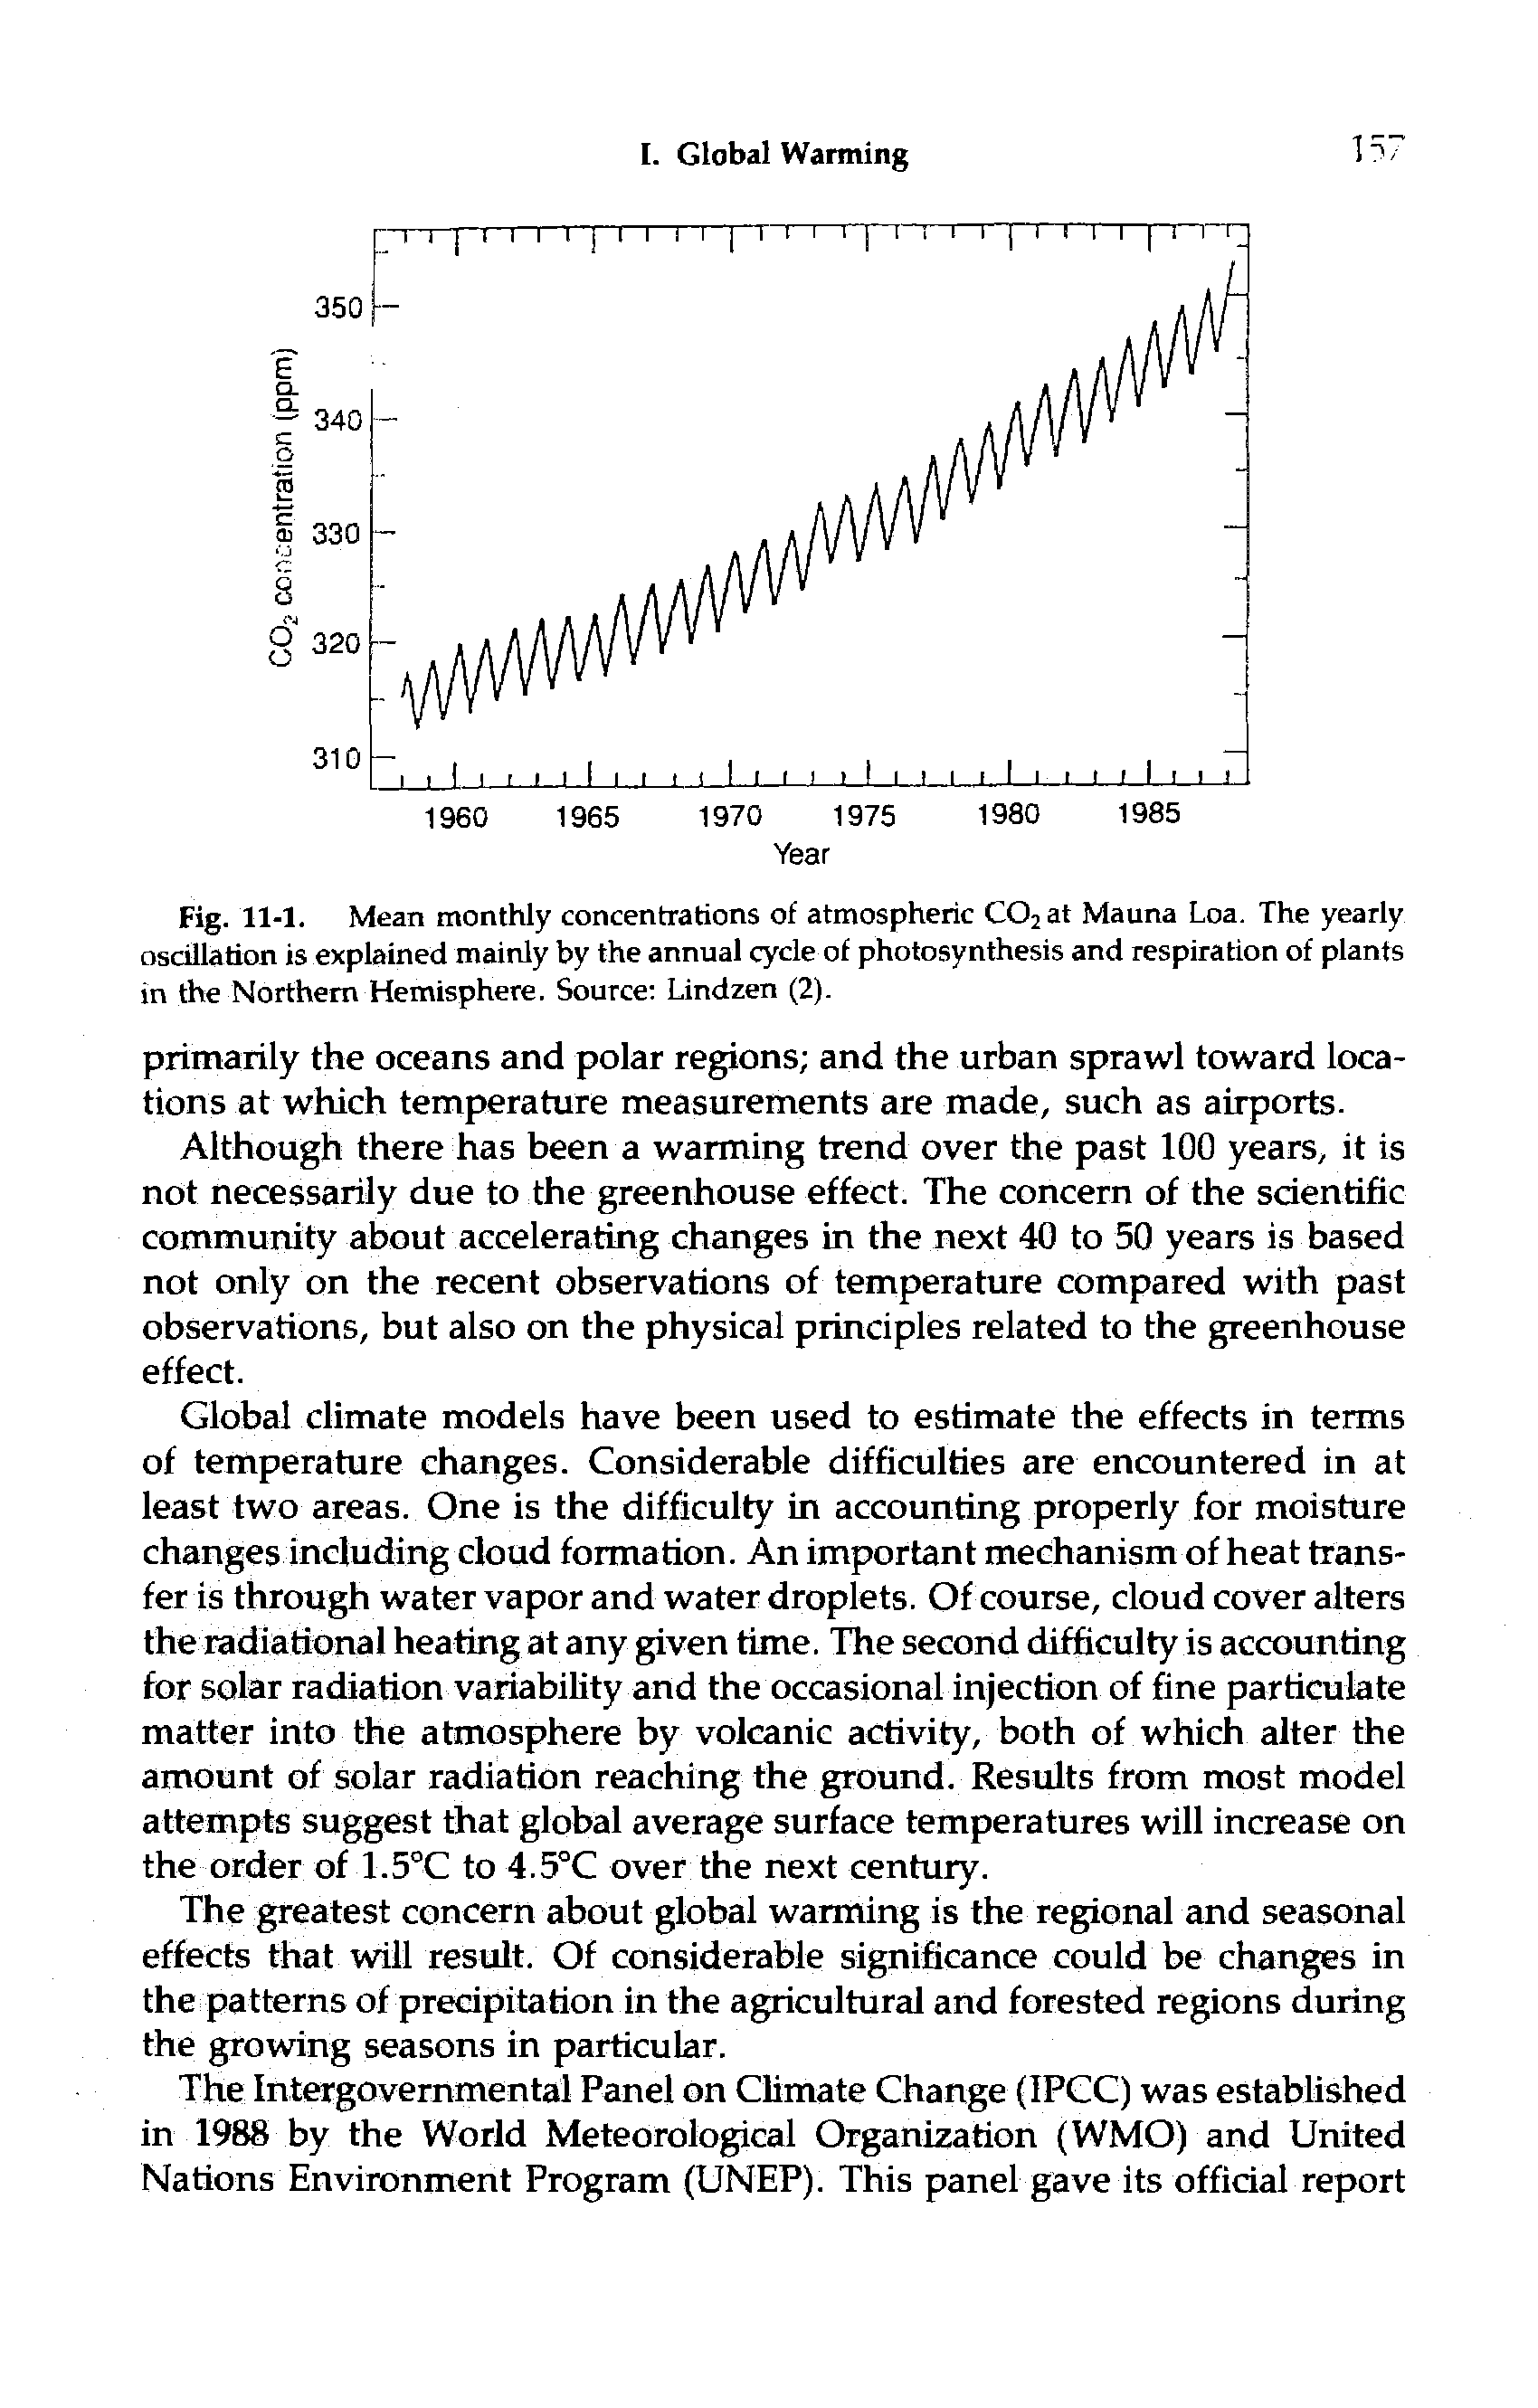 Fig. 11-1. Mean monthly concentrations of atmospheric C02at Mauna Loa. The yearly oscillation is explained mainly by the annual cycle of photosynthesis and respiration of plants in the Northern Hemisphere. Source Lindzen (2).